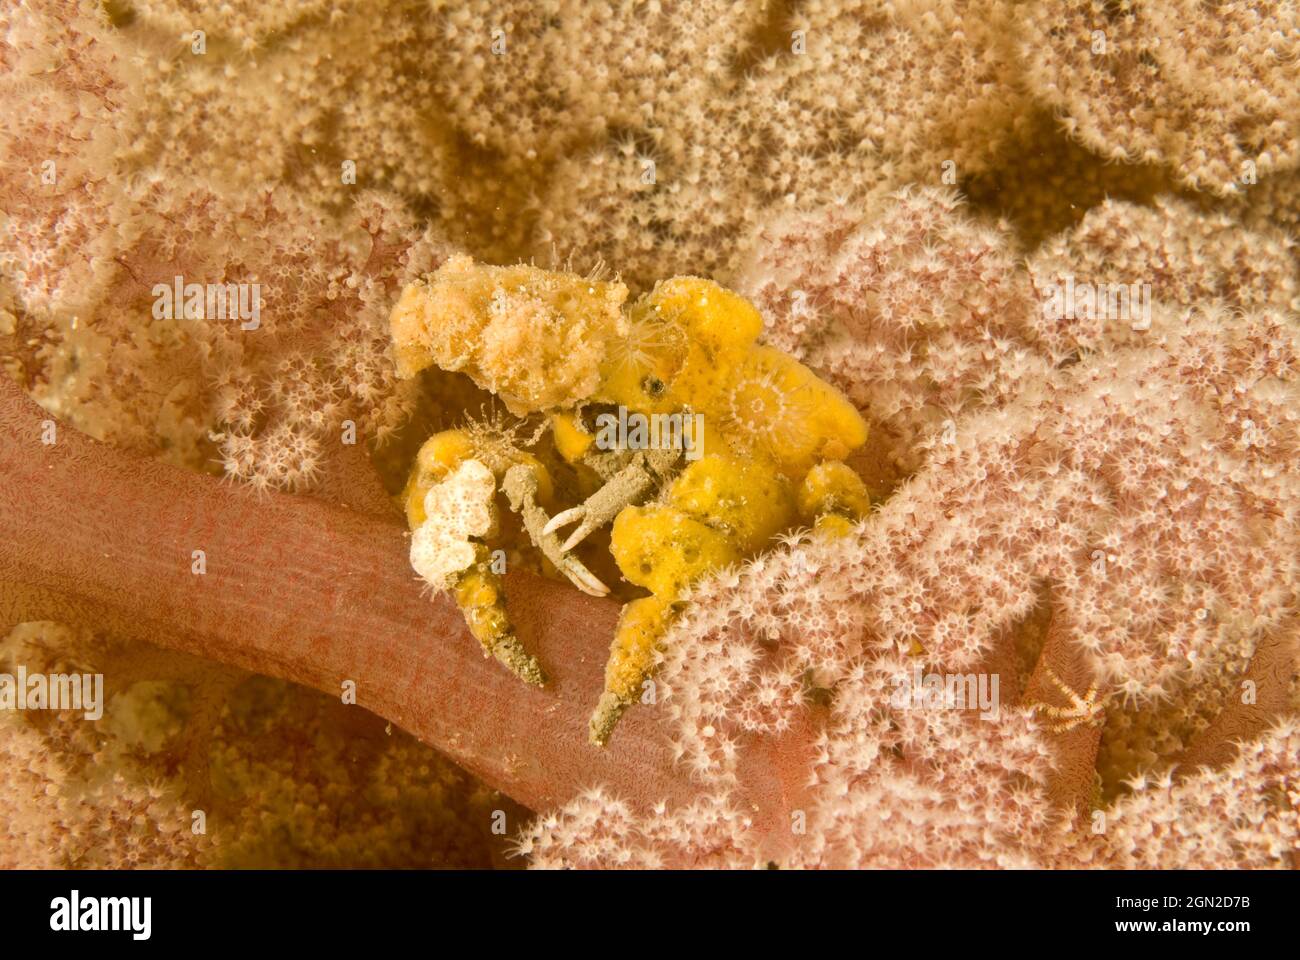 Sponge decorator crab (Hyastenus elatus), an extremely well camouflaged crab, member of the spider crab family, common in Sydney Harbour. Has a pear-s Stock Photo